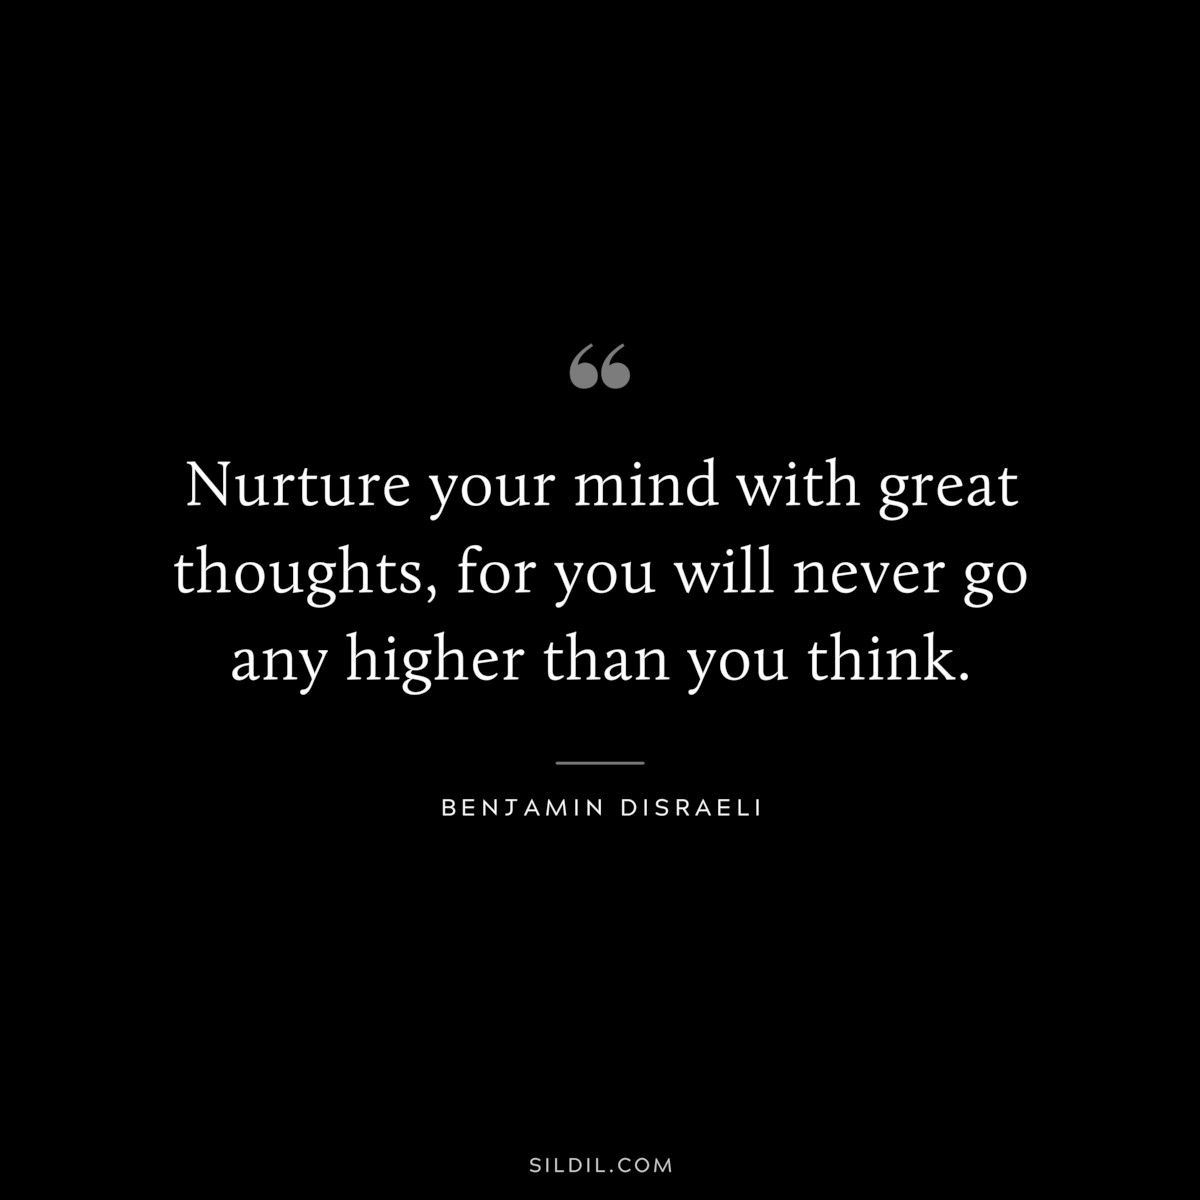 Nurture your mind with great thoughts, for you will never go any higher than you think. ― Benjamin Disraeli